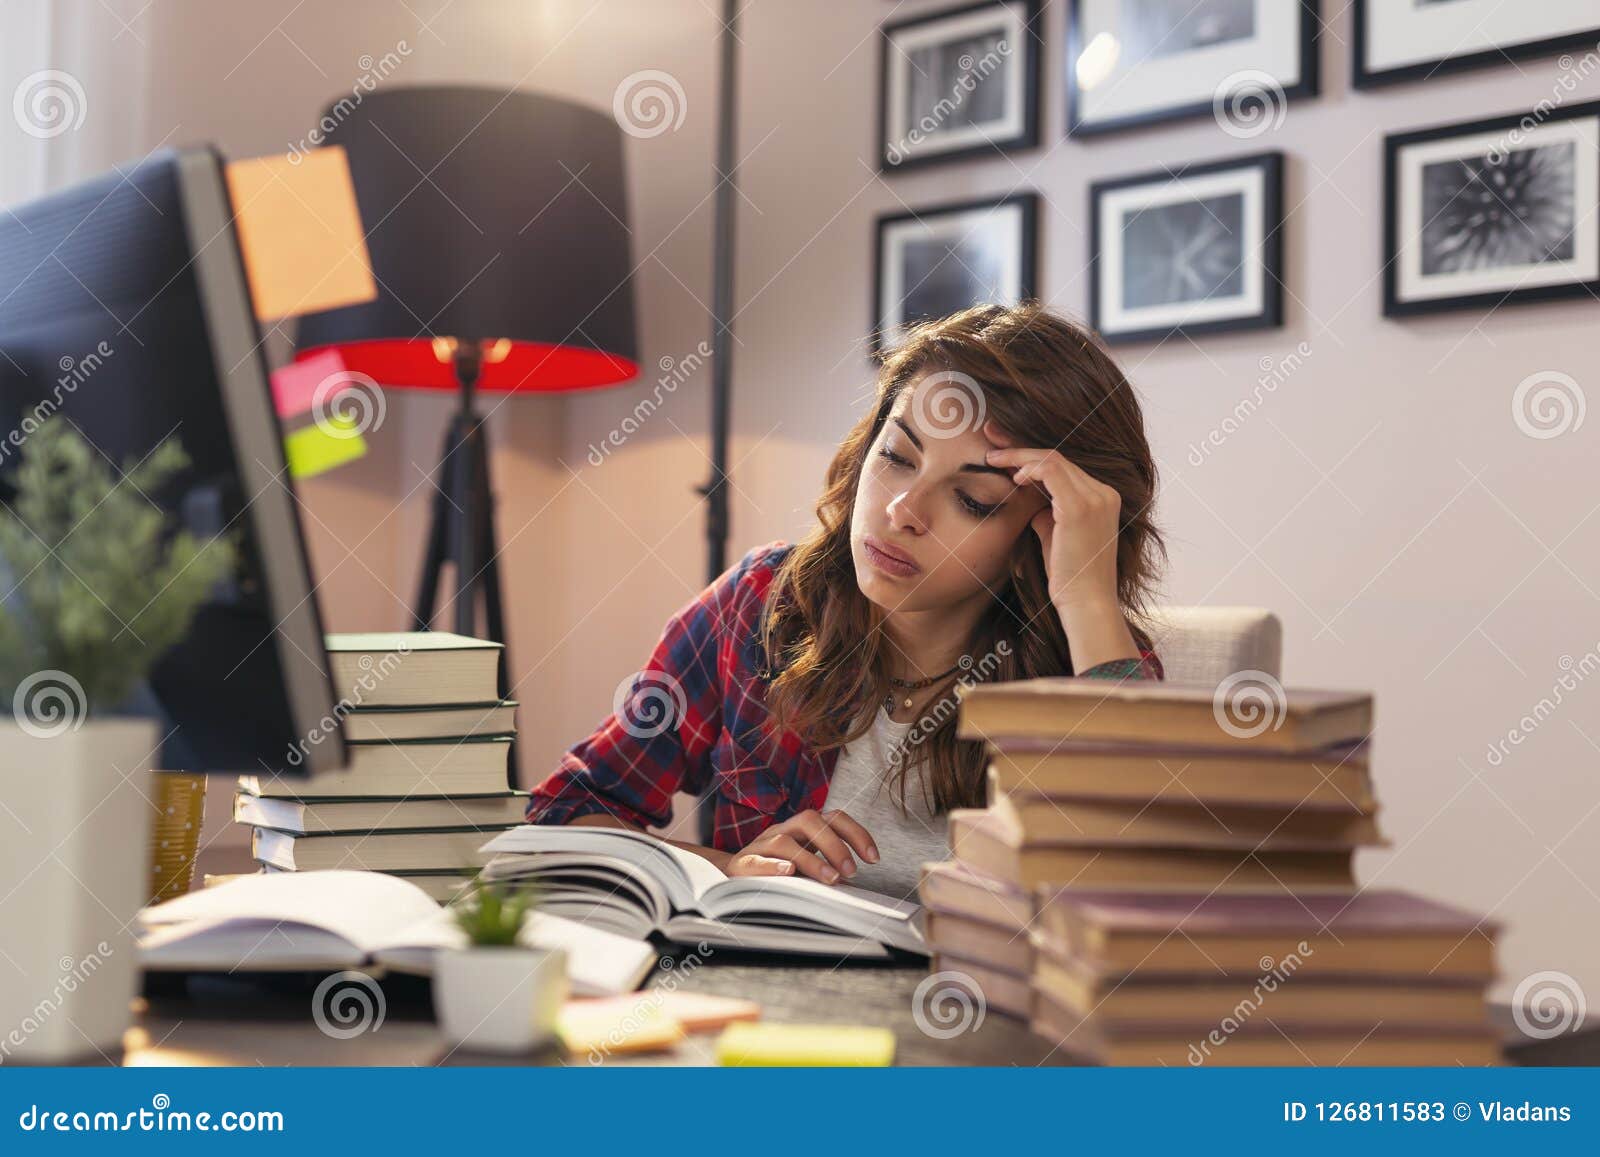 woman studying